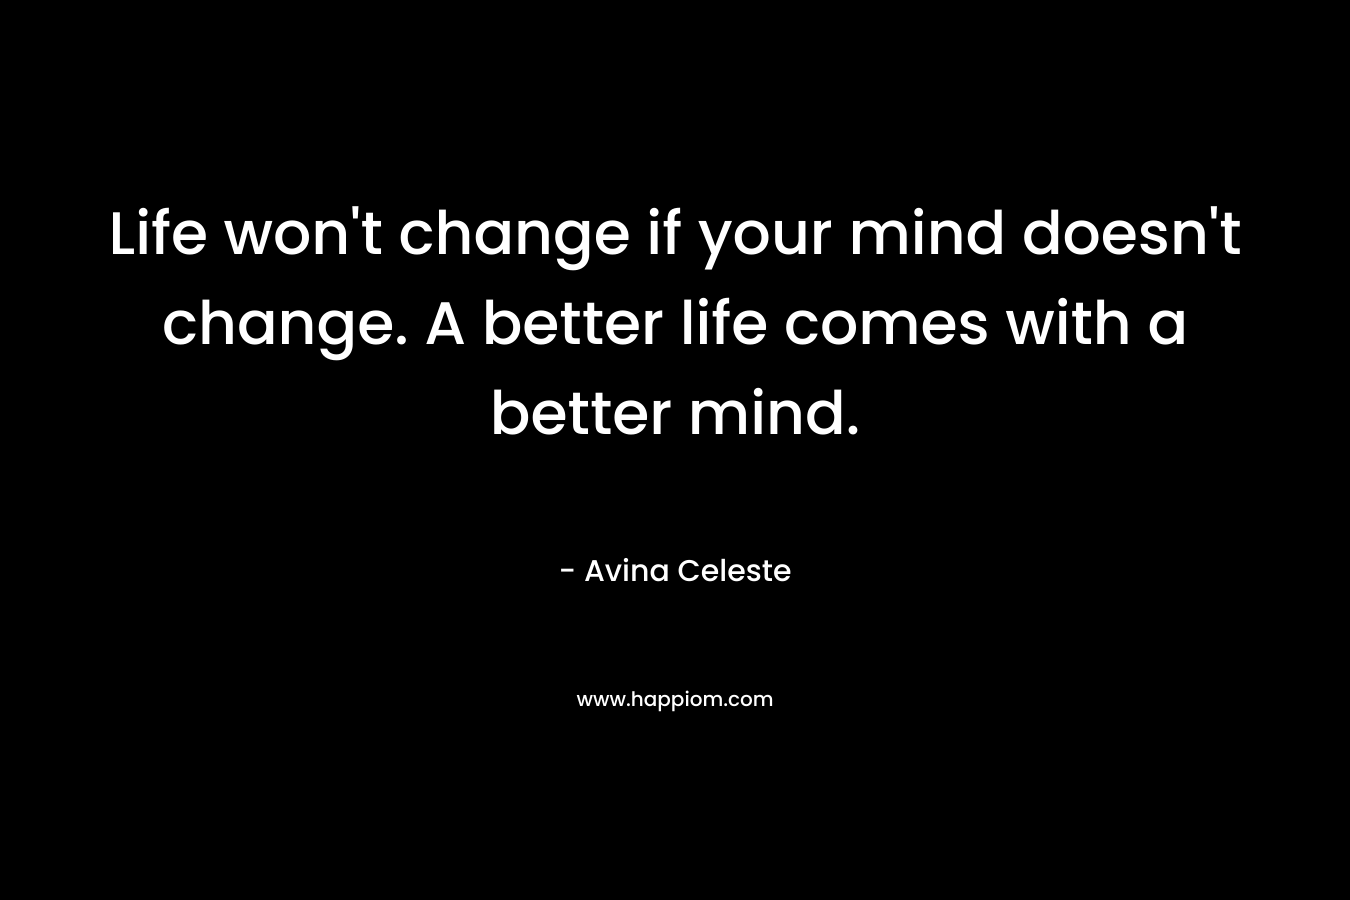 Life won't change if your mind doesn't change. A better life comes with a better mind.